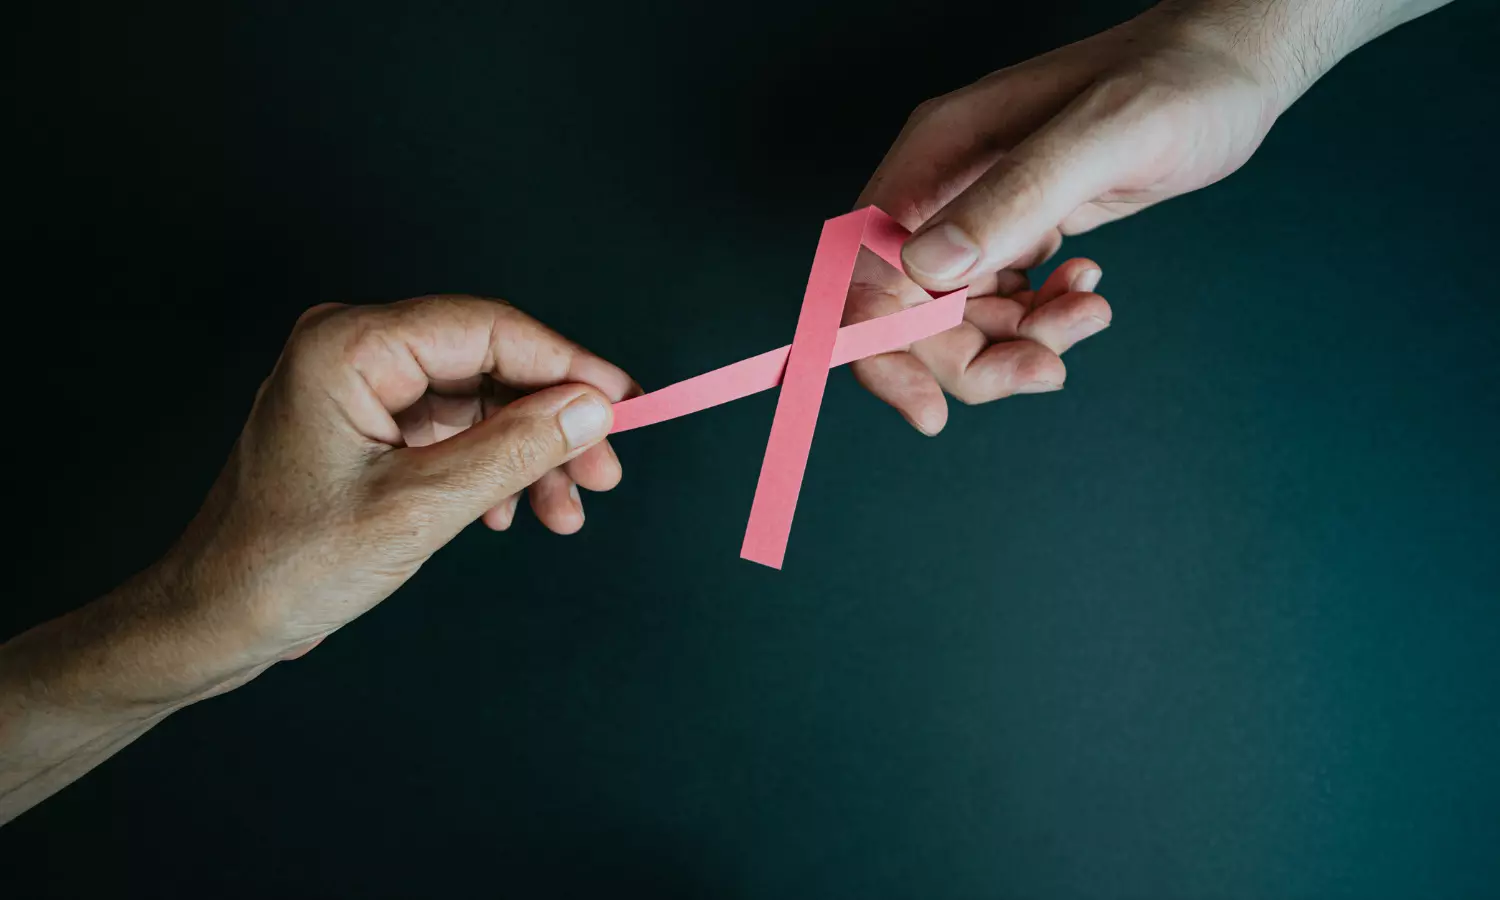 High dose antipsychotic users at increased risk of breast cancer